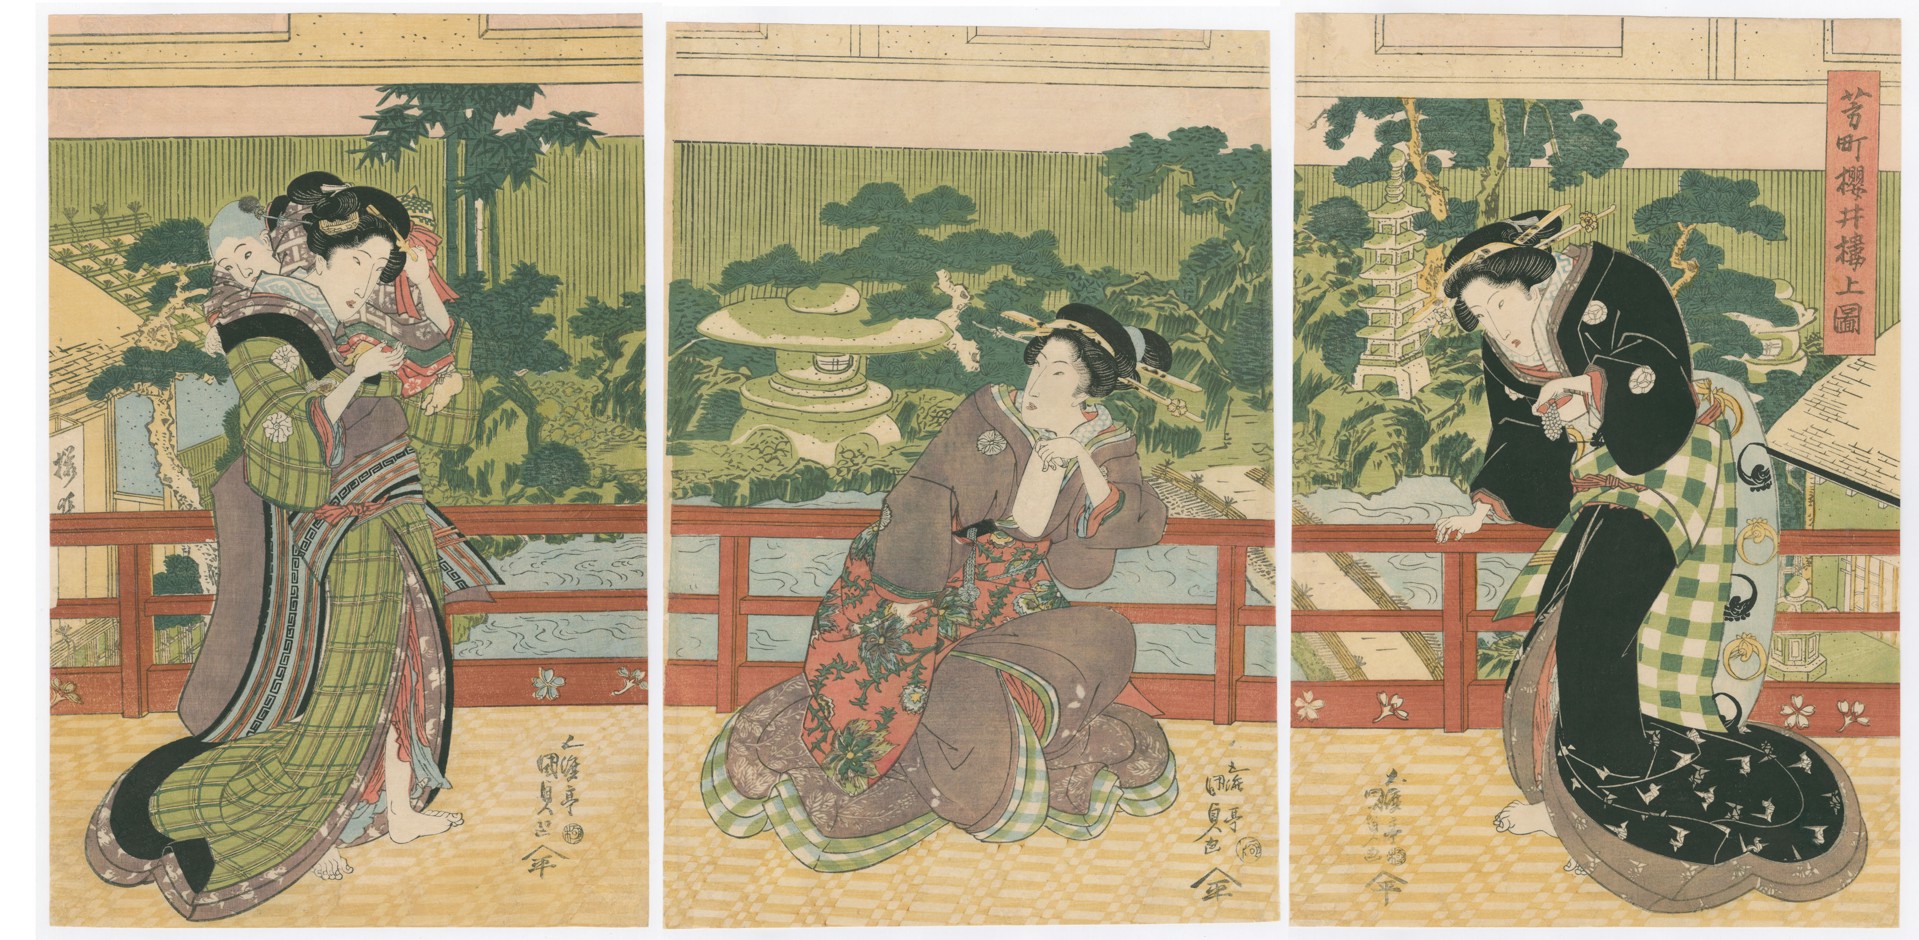 The Roof Garden of the Oi Clan Mansion on Yoshi Street in Edo by Kunisada